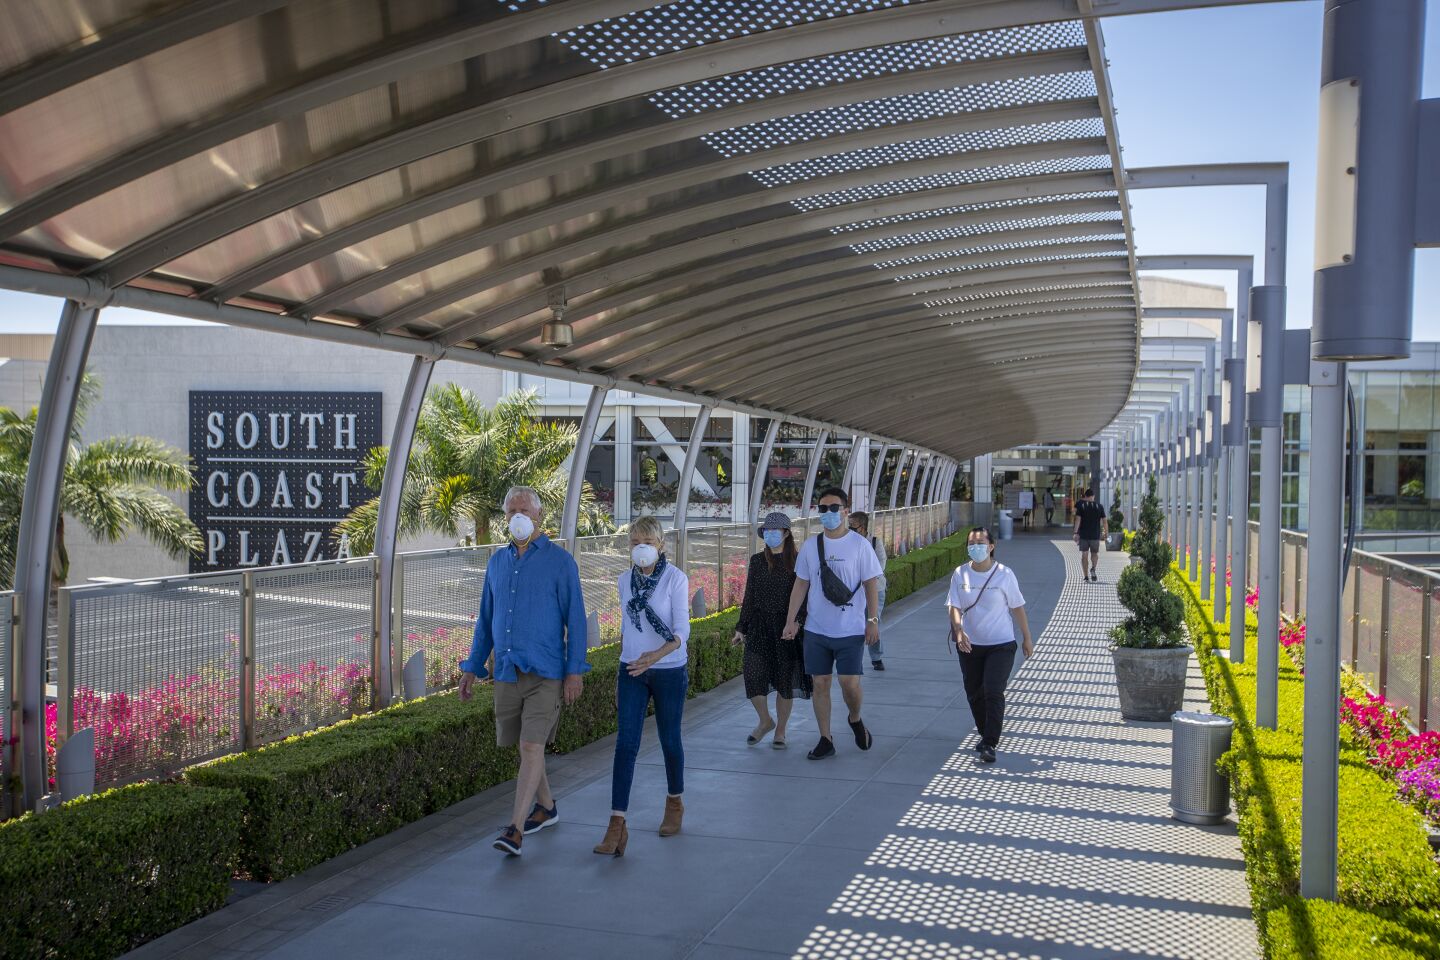 COSTA MESA, CA - JUNE 11: Shoppers wear protective masks while walking on The Bridge Of Gardens at South Coast Plaza as they reopen, requiring customers maintain a social distance and wear face masks at South Coast Plaza Thursday, June 11, 2020 in Costa Mesa, CA. Although not all stores in the upscale shopping center will resume operations, more than 110 merchants - including Apple, Macy's and Nordstrom - are opening their doors after being closed for three months amid the coronavirus pandemic. (Allen J. Schaben / Los Angeles Times)